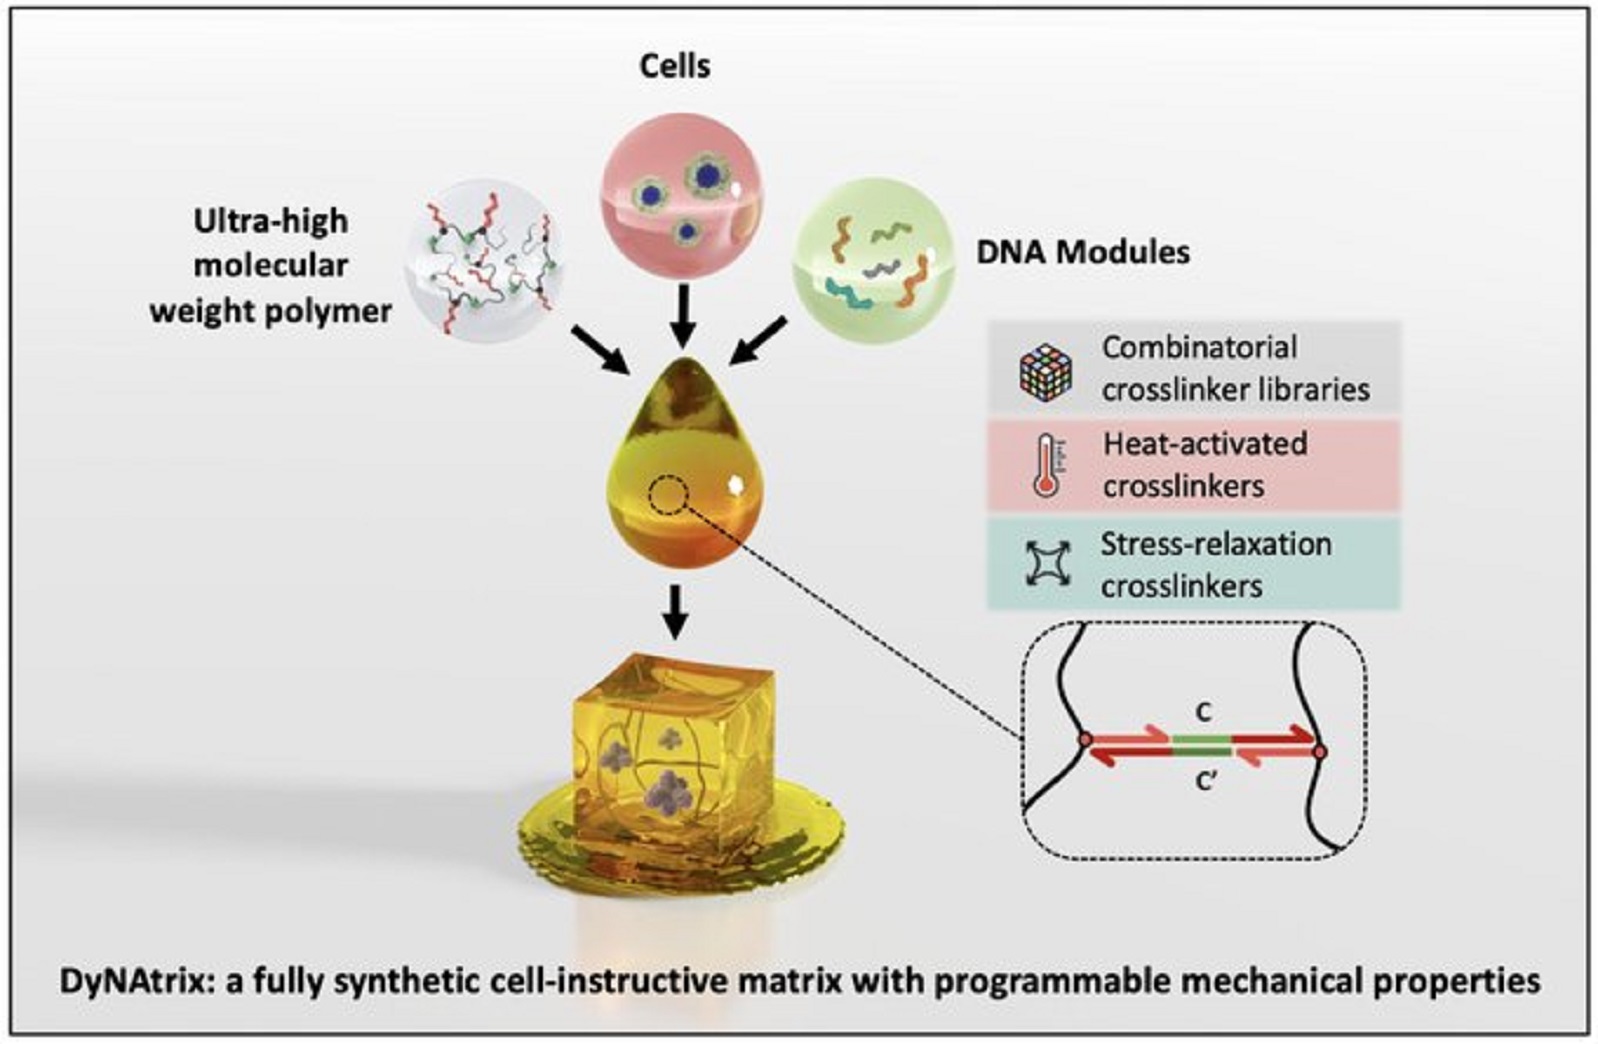 DyNAtrix: a fully synthetic cell-instructive matrix with programmable mechanical properties